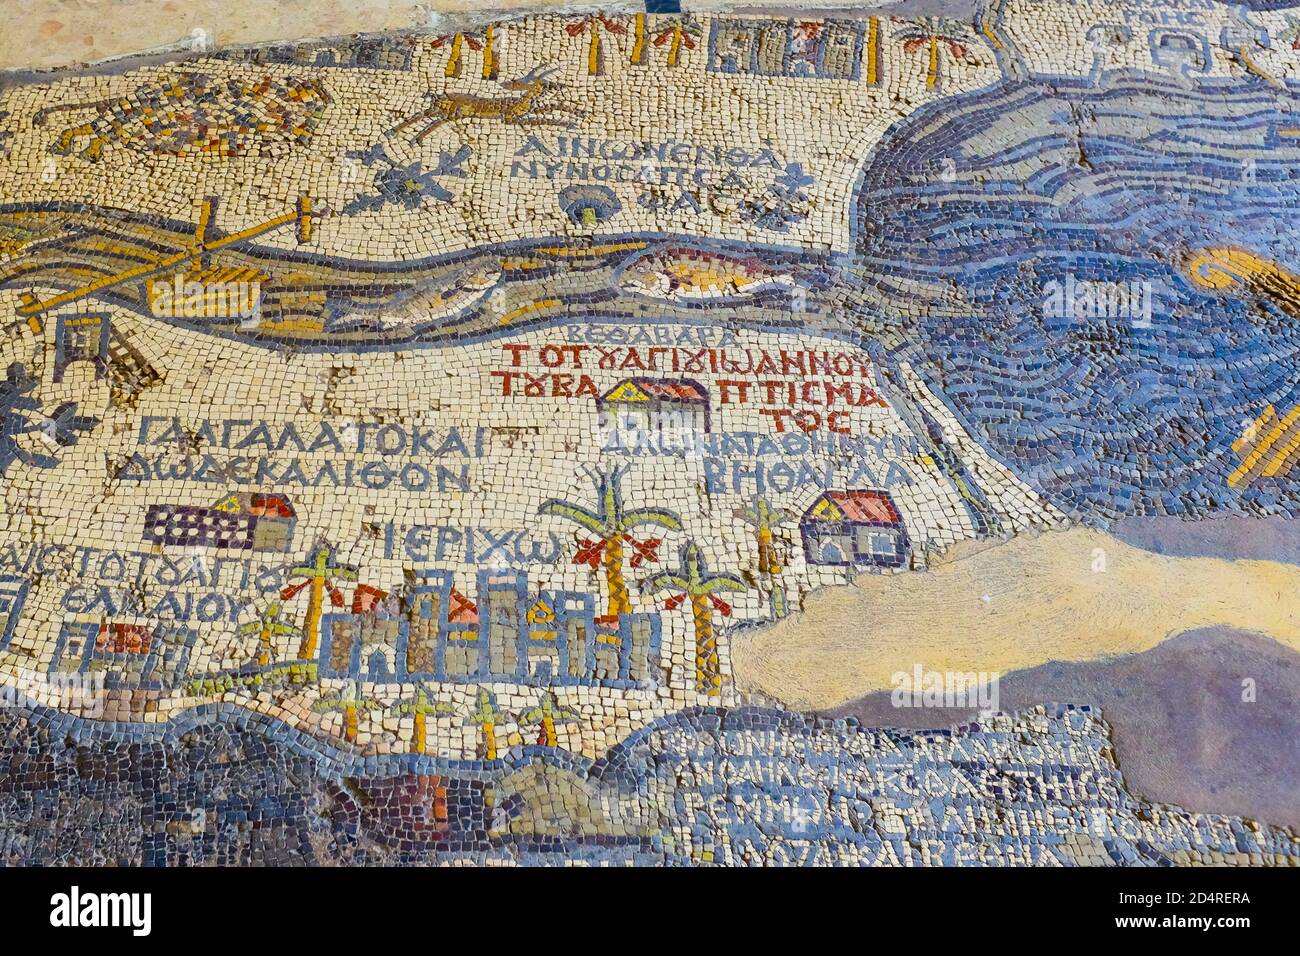 Detail from Madaba Mosaic Map showing the River Jordan and the Dead Sea. The mosaic is the oldest surviving map of the Holy Land. St George Church. Stock Photo